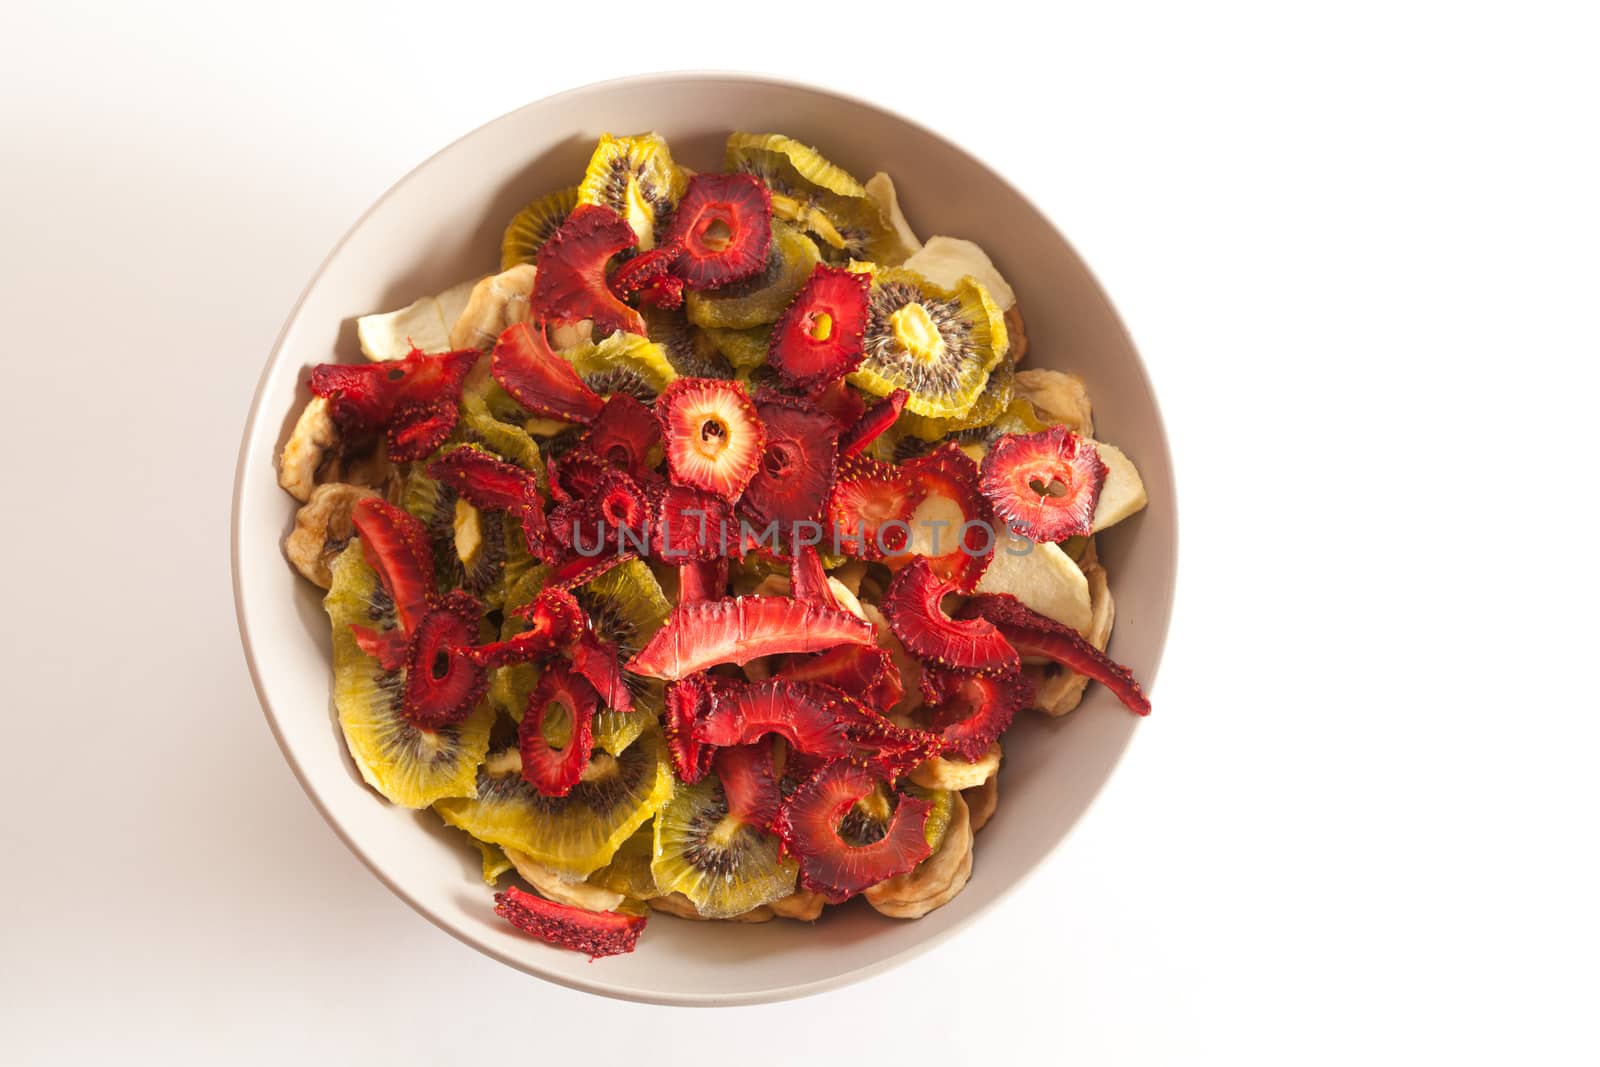 Different varieties mix of dried fruits in white plate